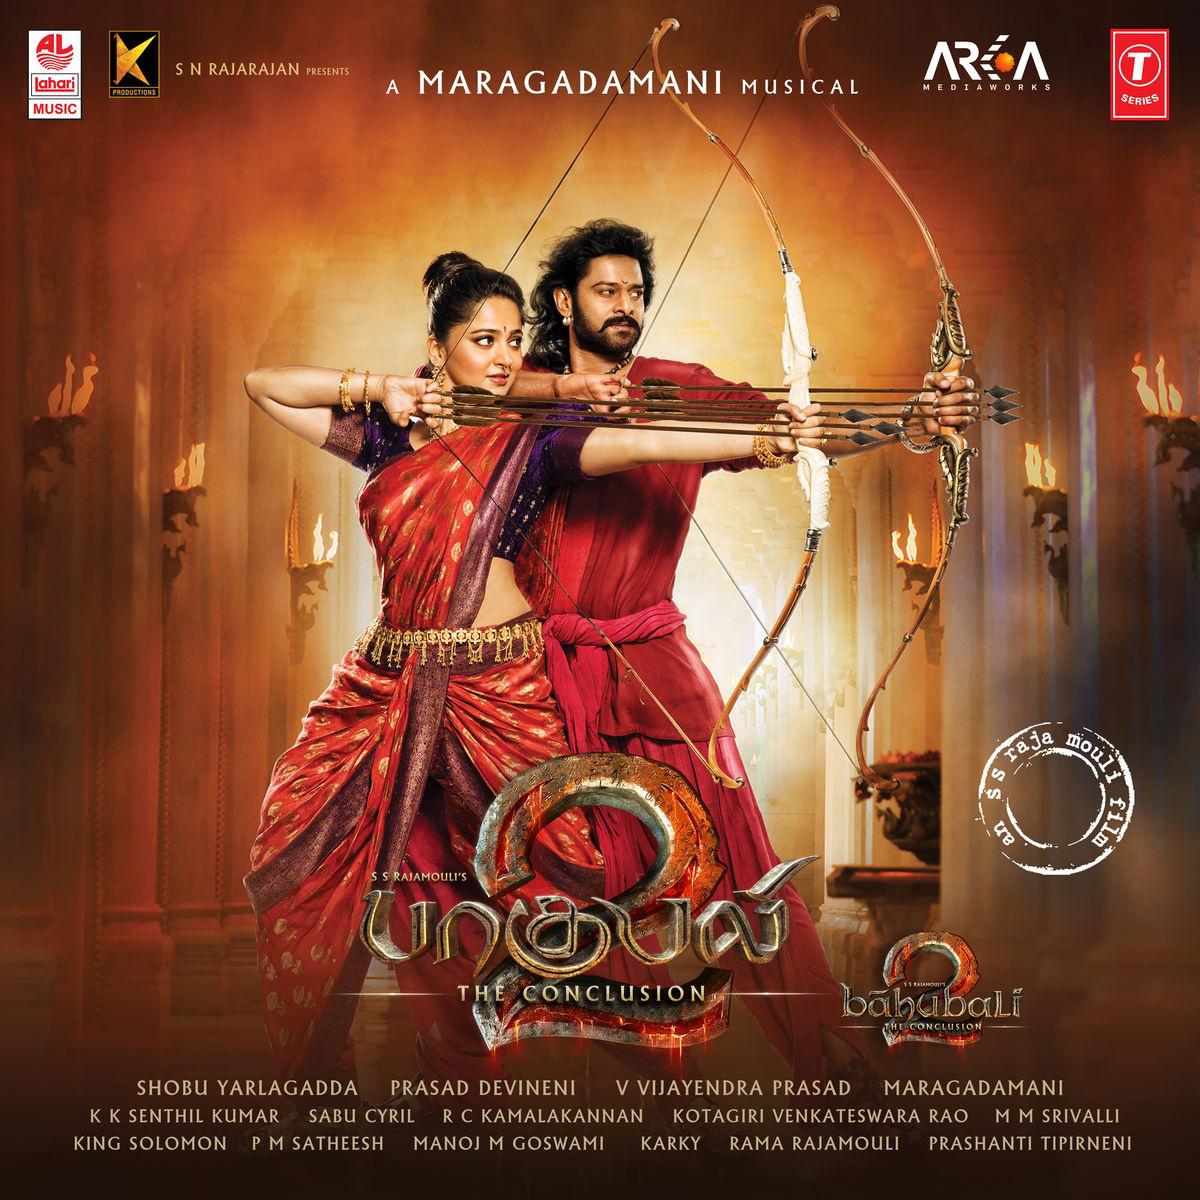 Baahubali 2 - The Conclusion (Original Motion Picture Soundtrack)